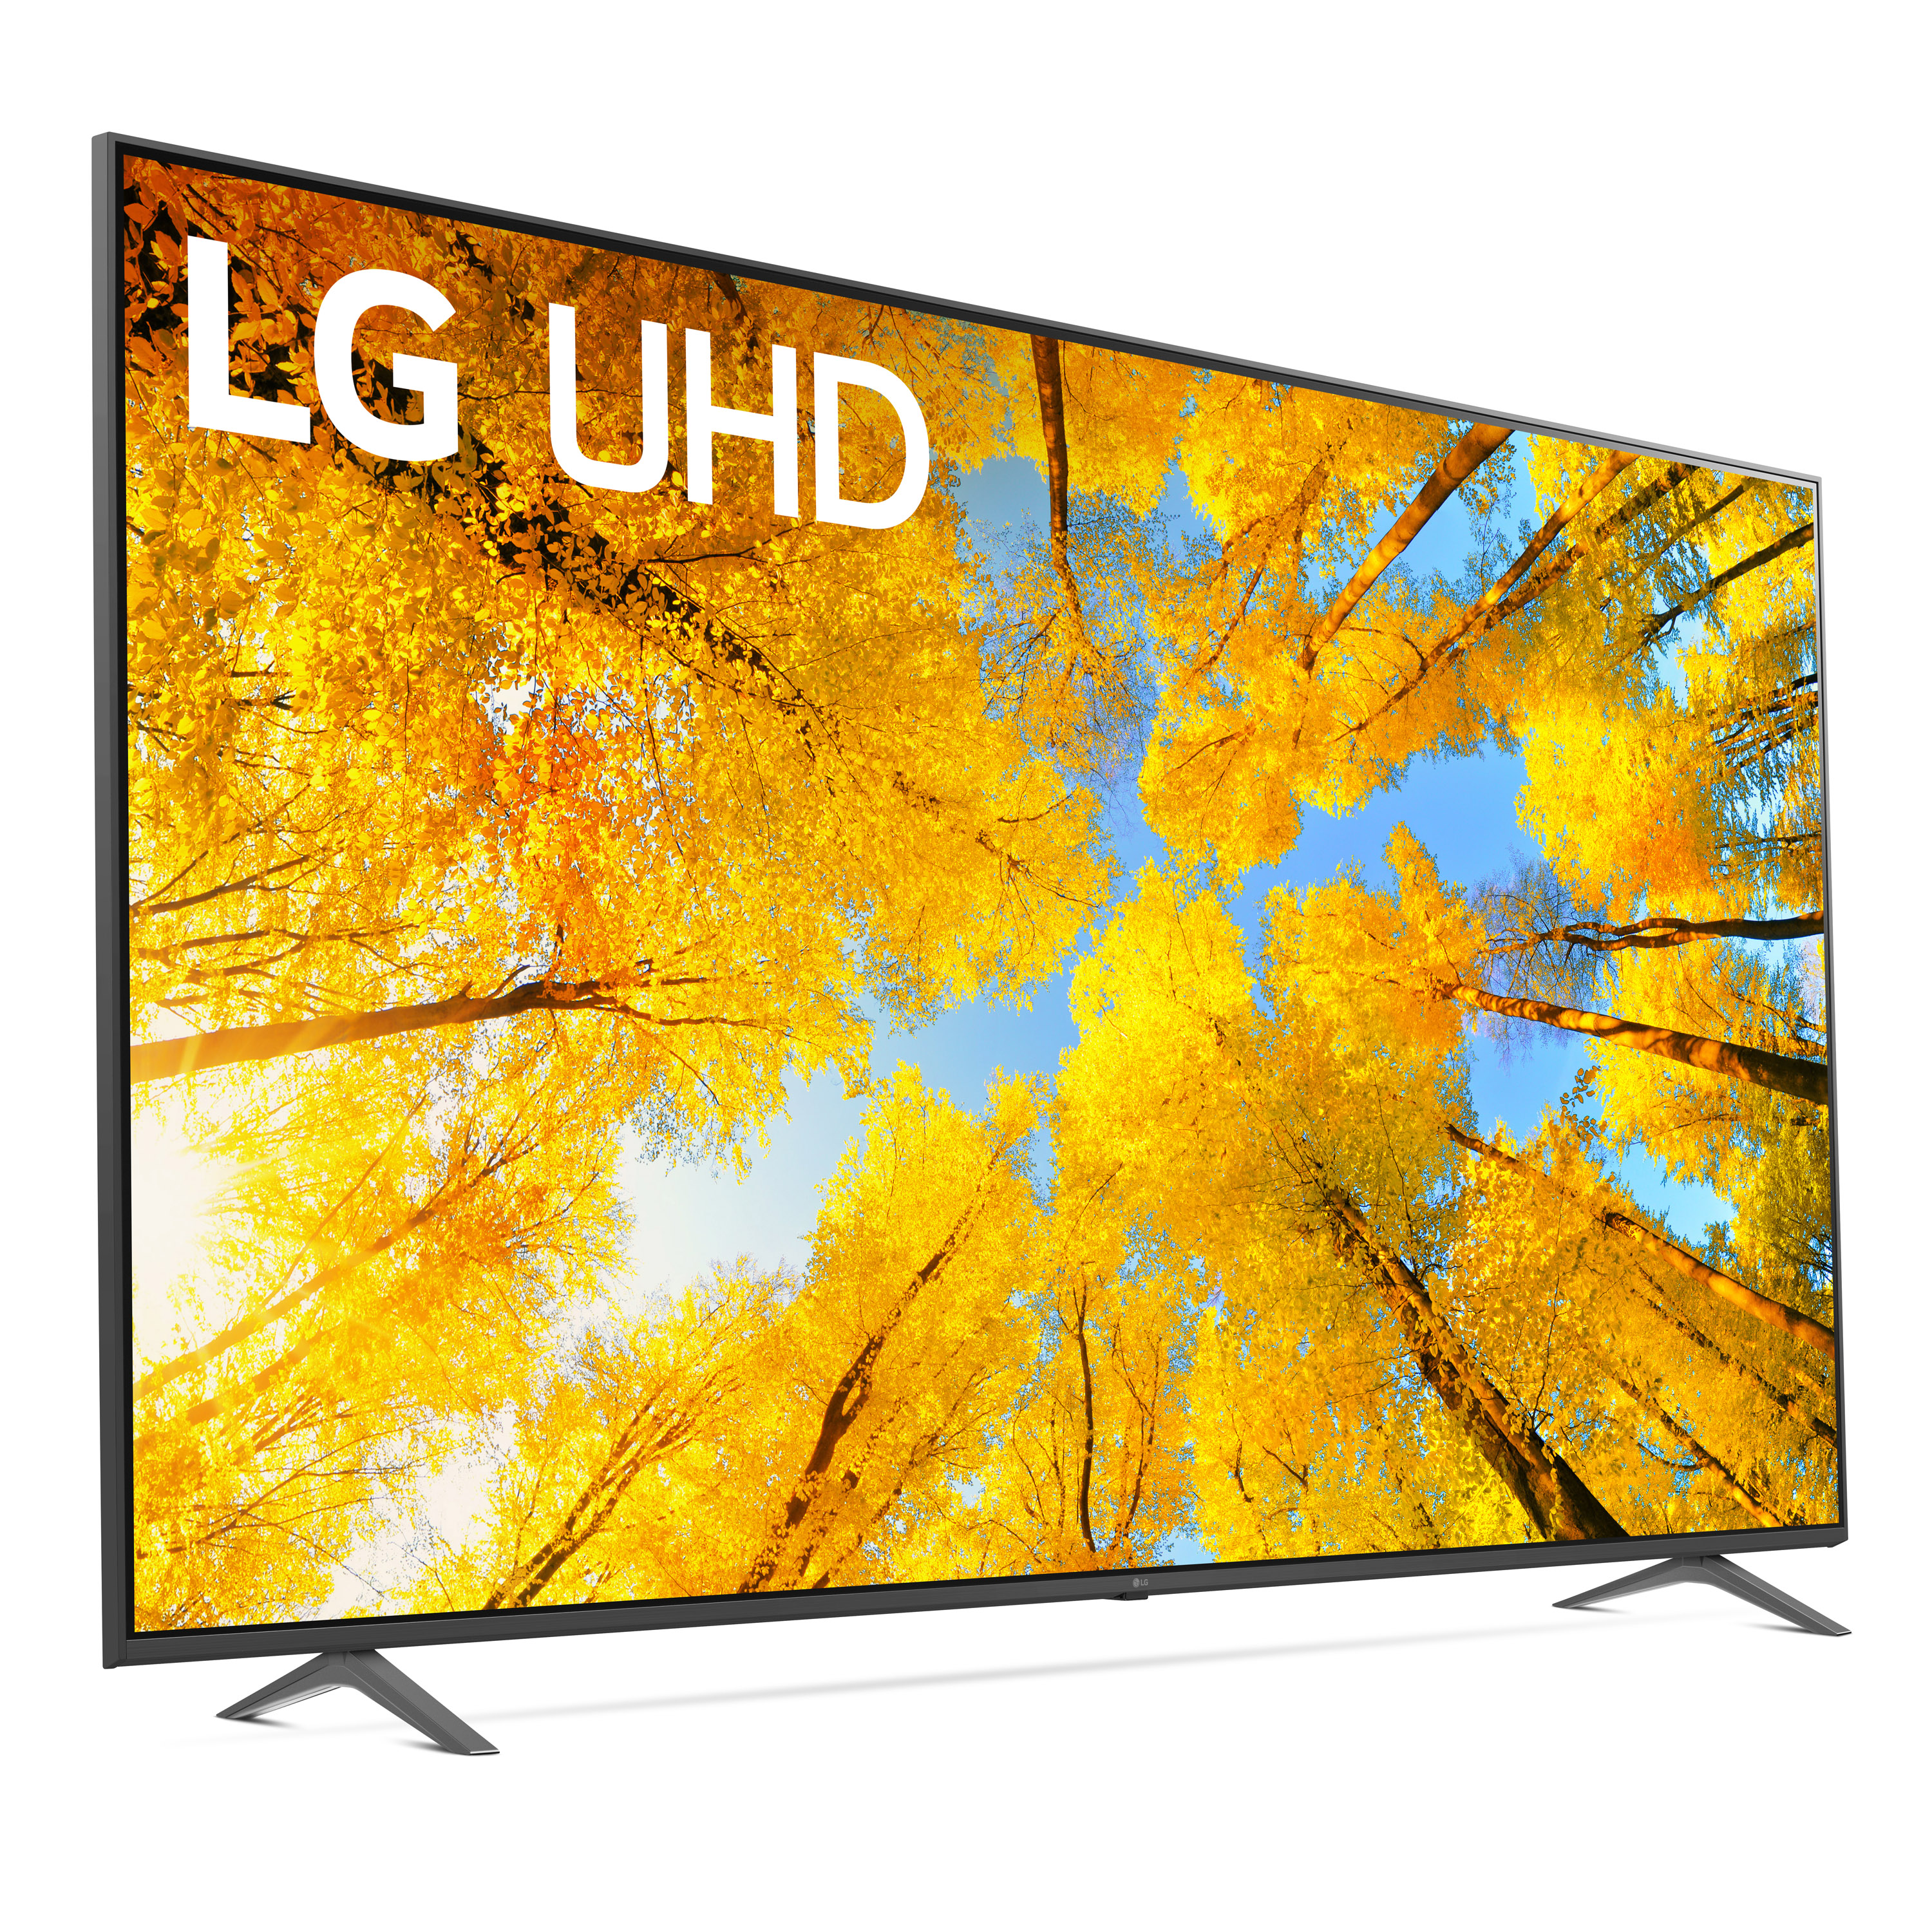 LG 86 inches Class 4K UHD 2160P WebOS22 Smart TV with Active HDR UQ7590 Series 86UQ7590PUD - image 5 of 14